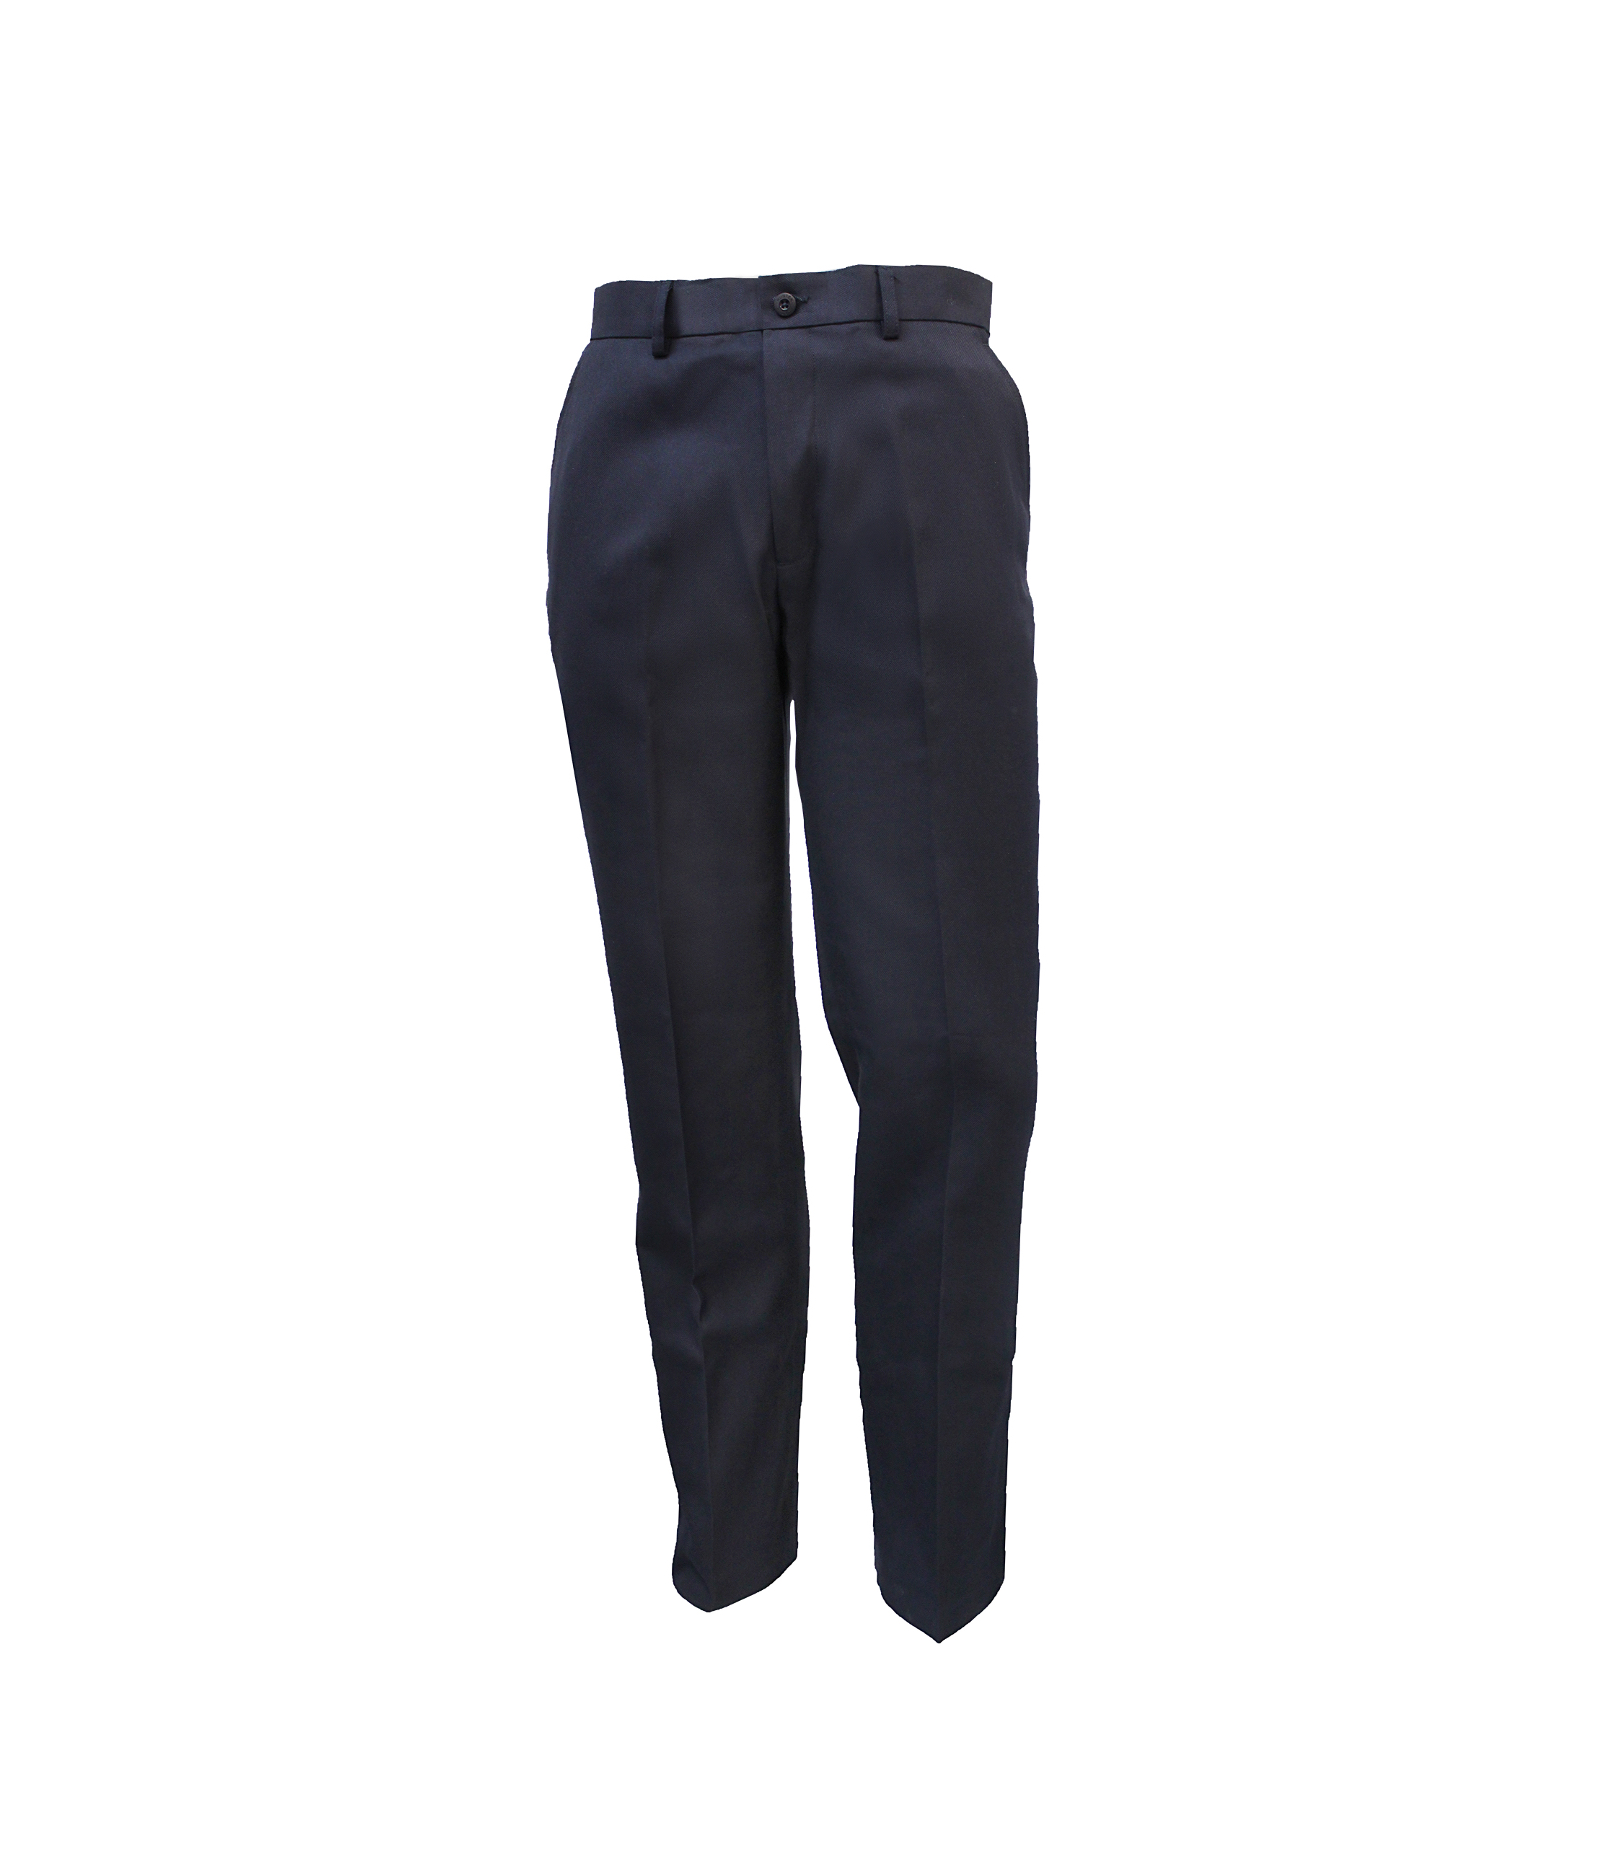 Youths aposLewisapos School Trousers  Slim Fit  Black